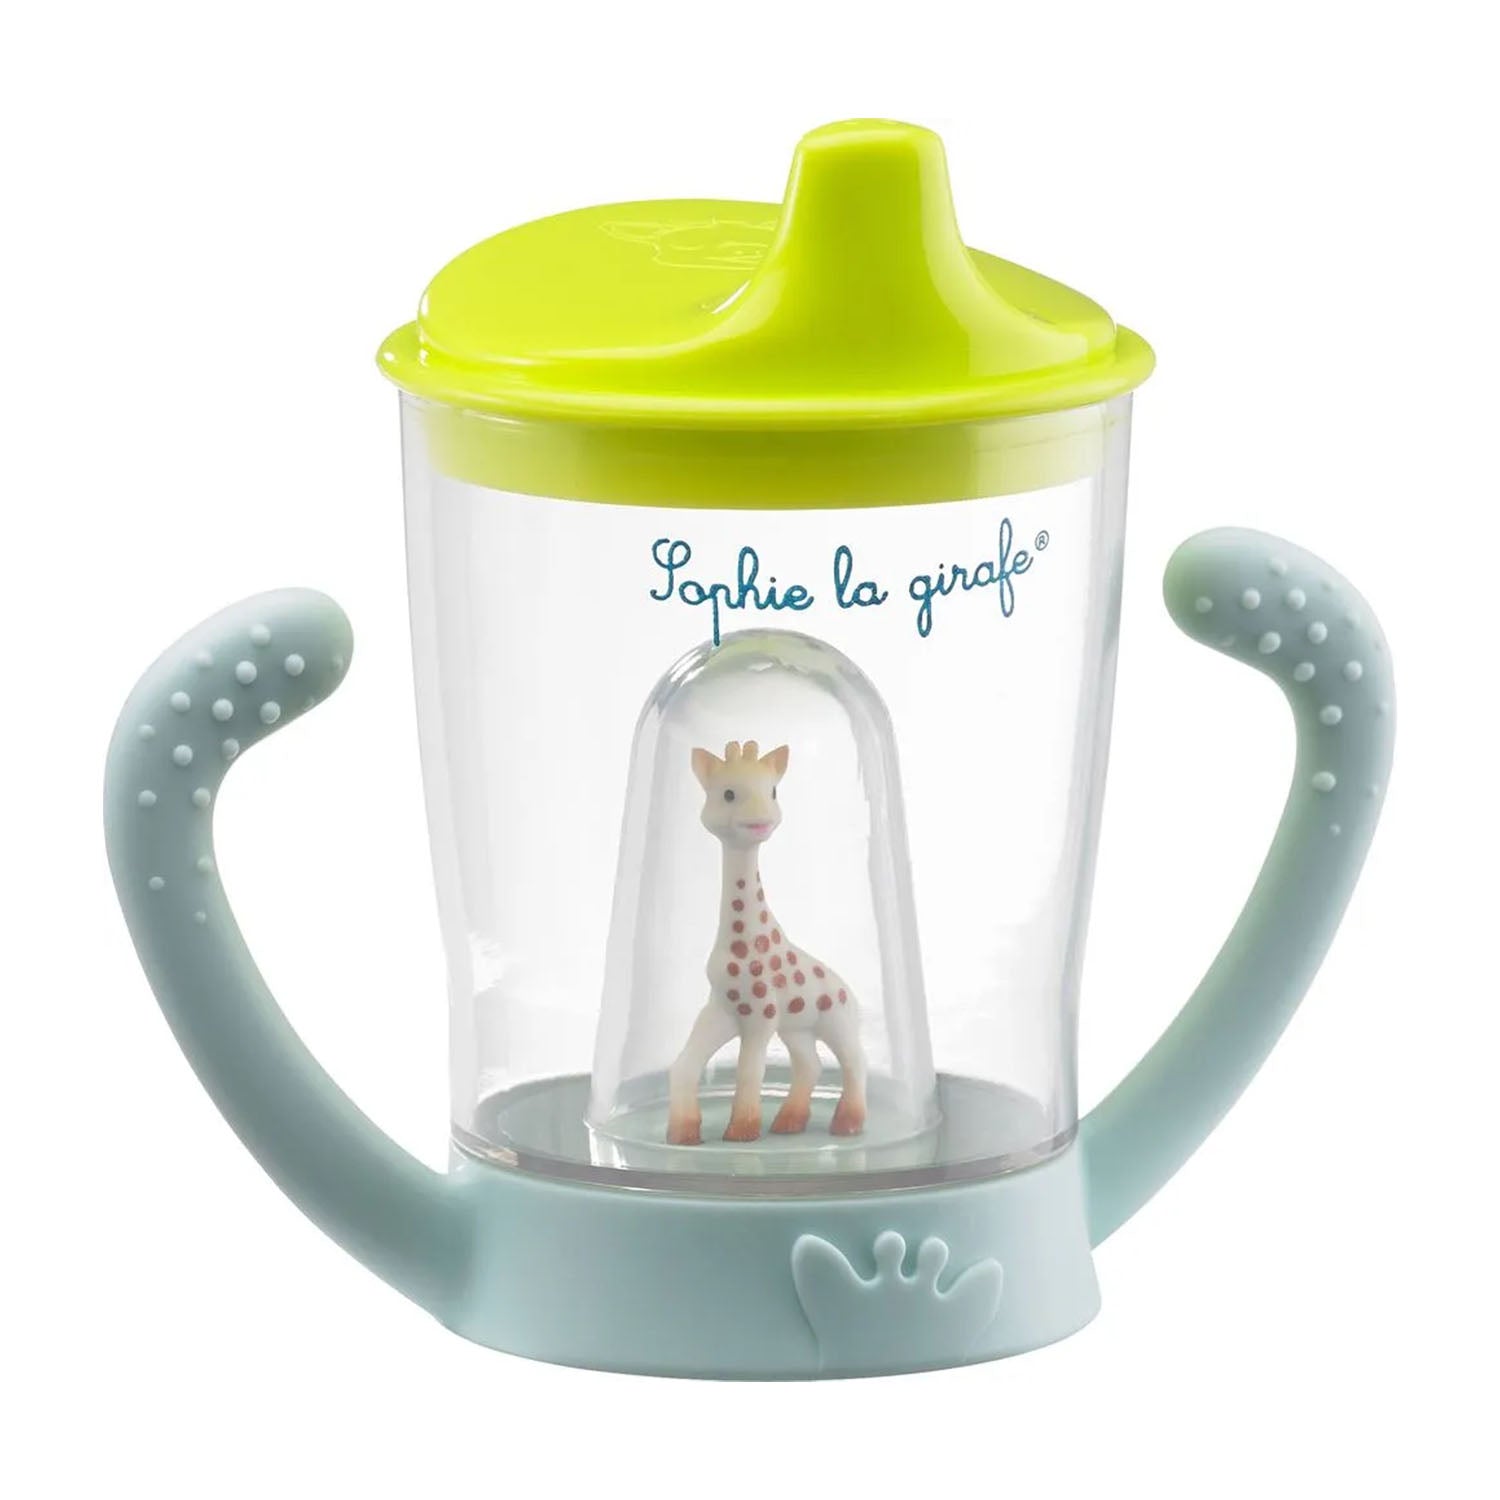 An image of No Spill Cup - Baby Cup - Non-spill cup | Sophie la Girafe